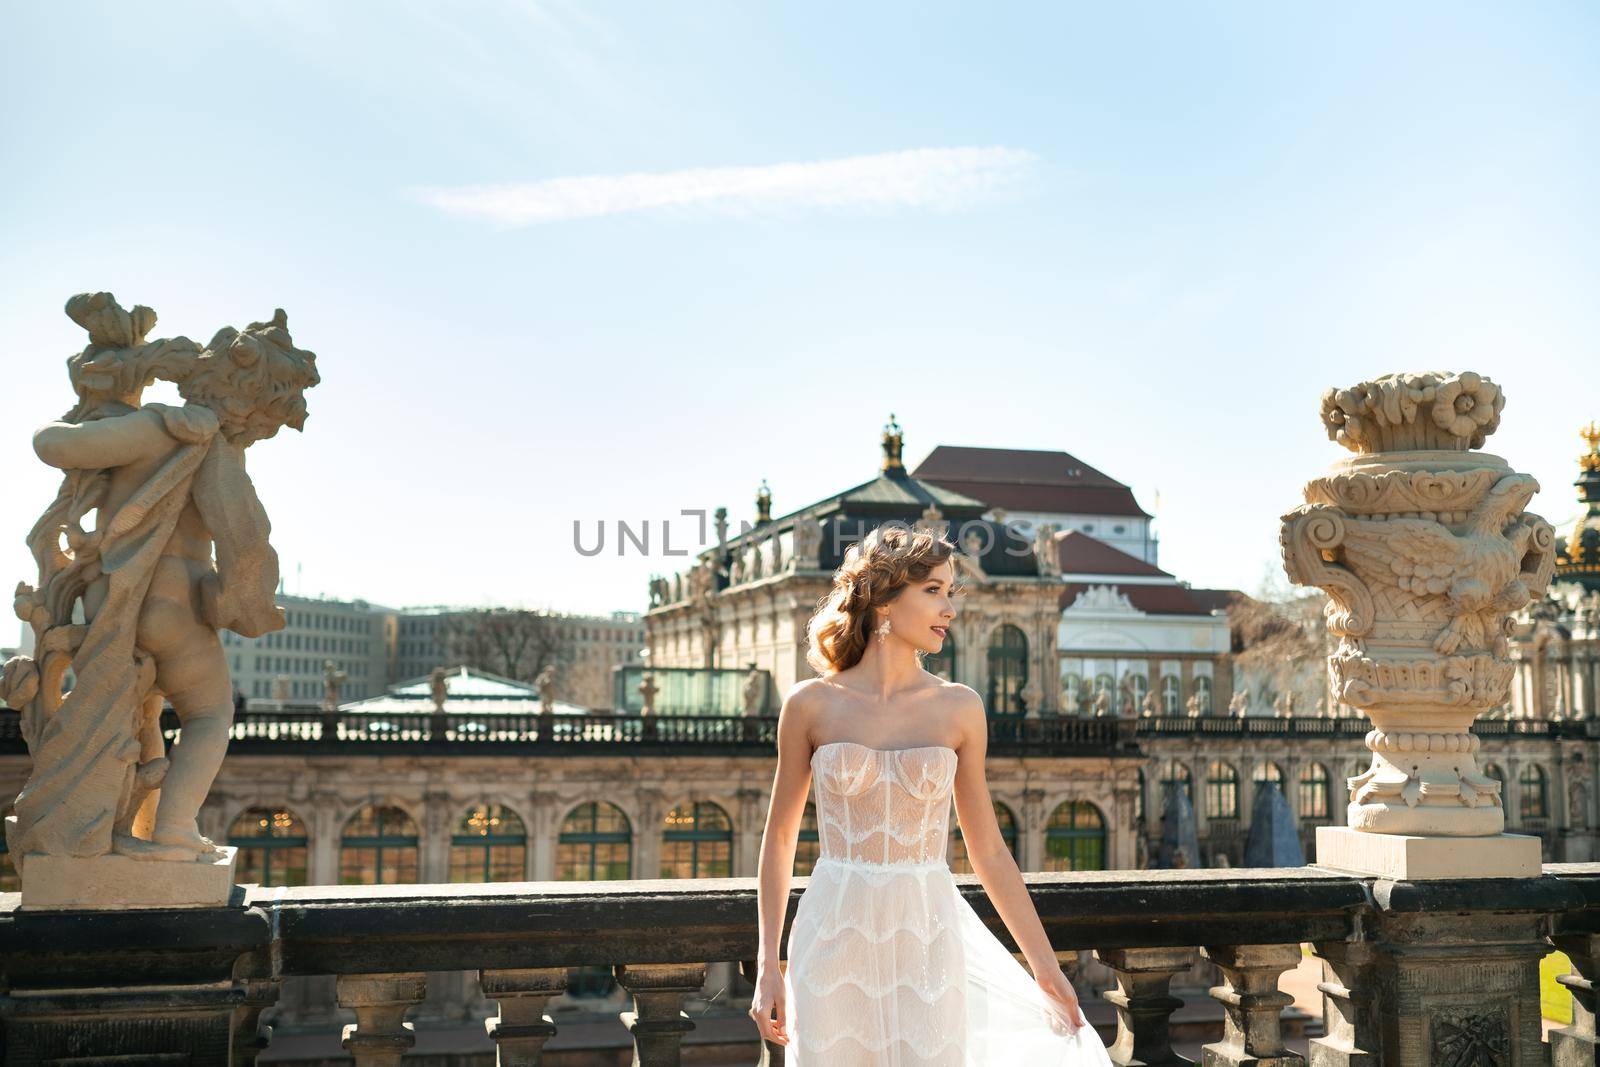 A bride in a white dress on a wedding walk at the famous Baroque Zwinger Palace in Dresden, Saxony, Germany by Lobachad